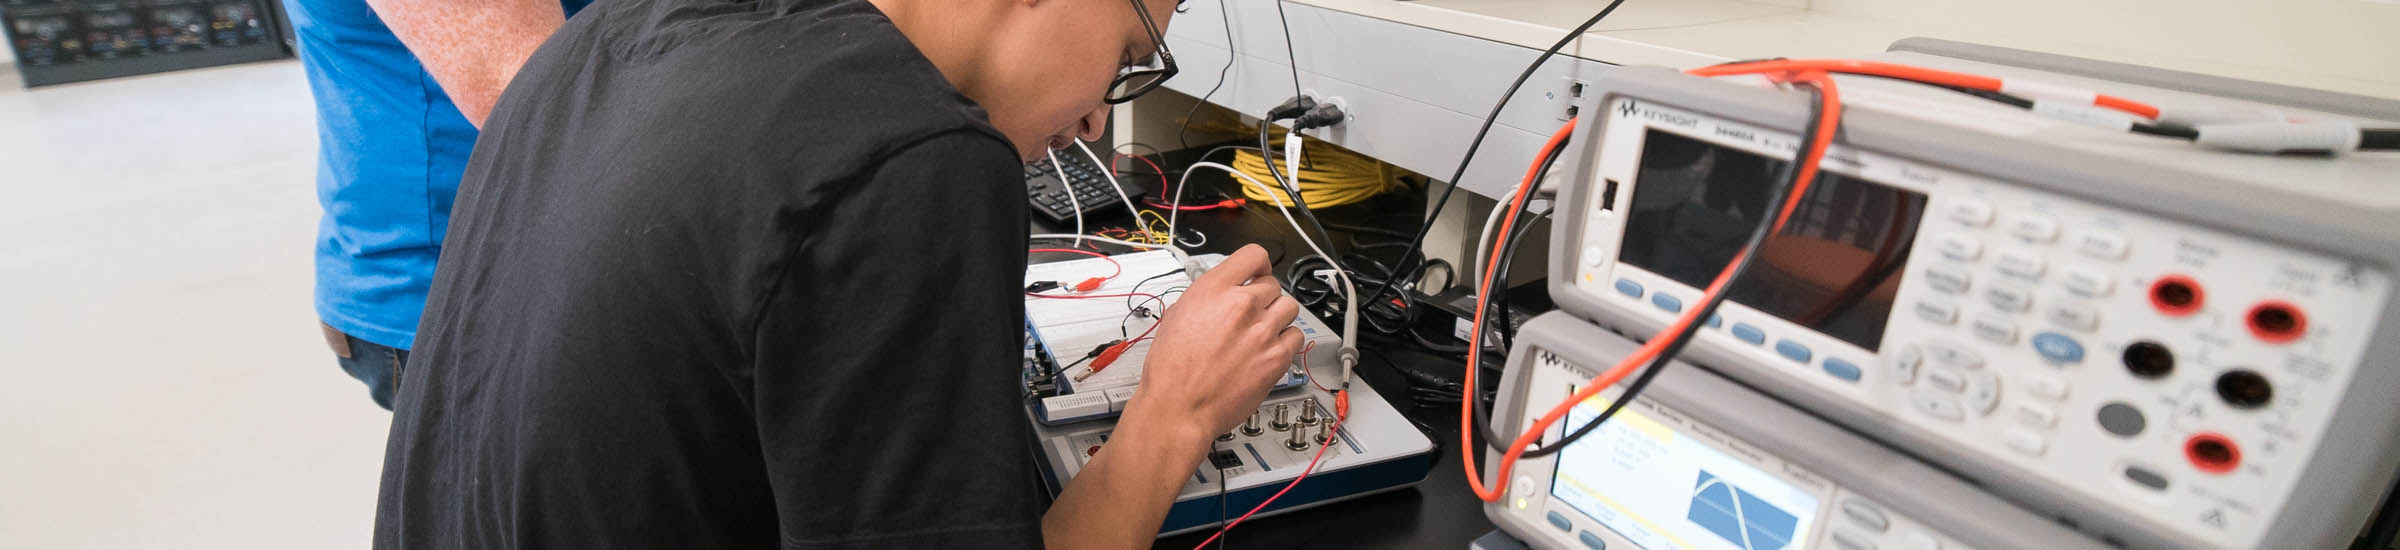 Student conducting research in Electrical Engineering Lab